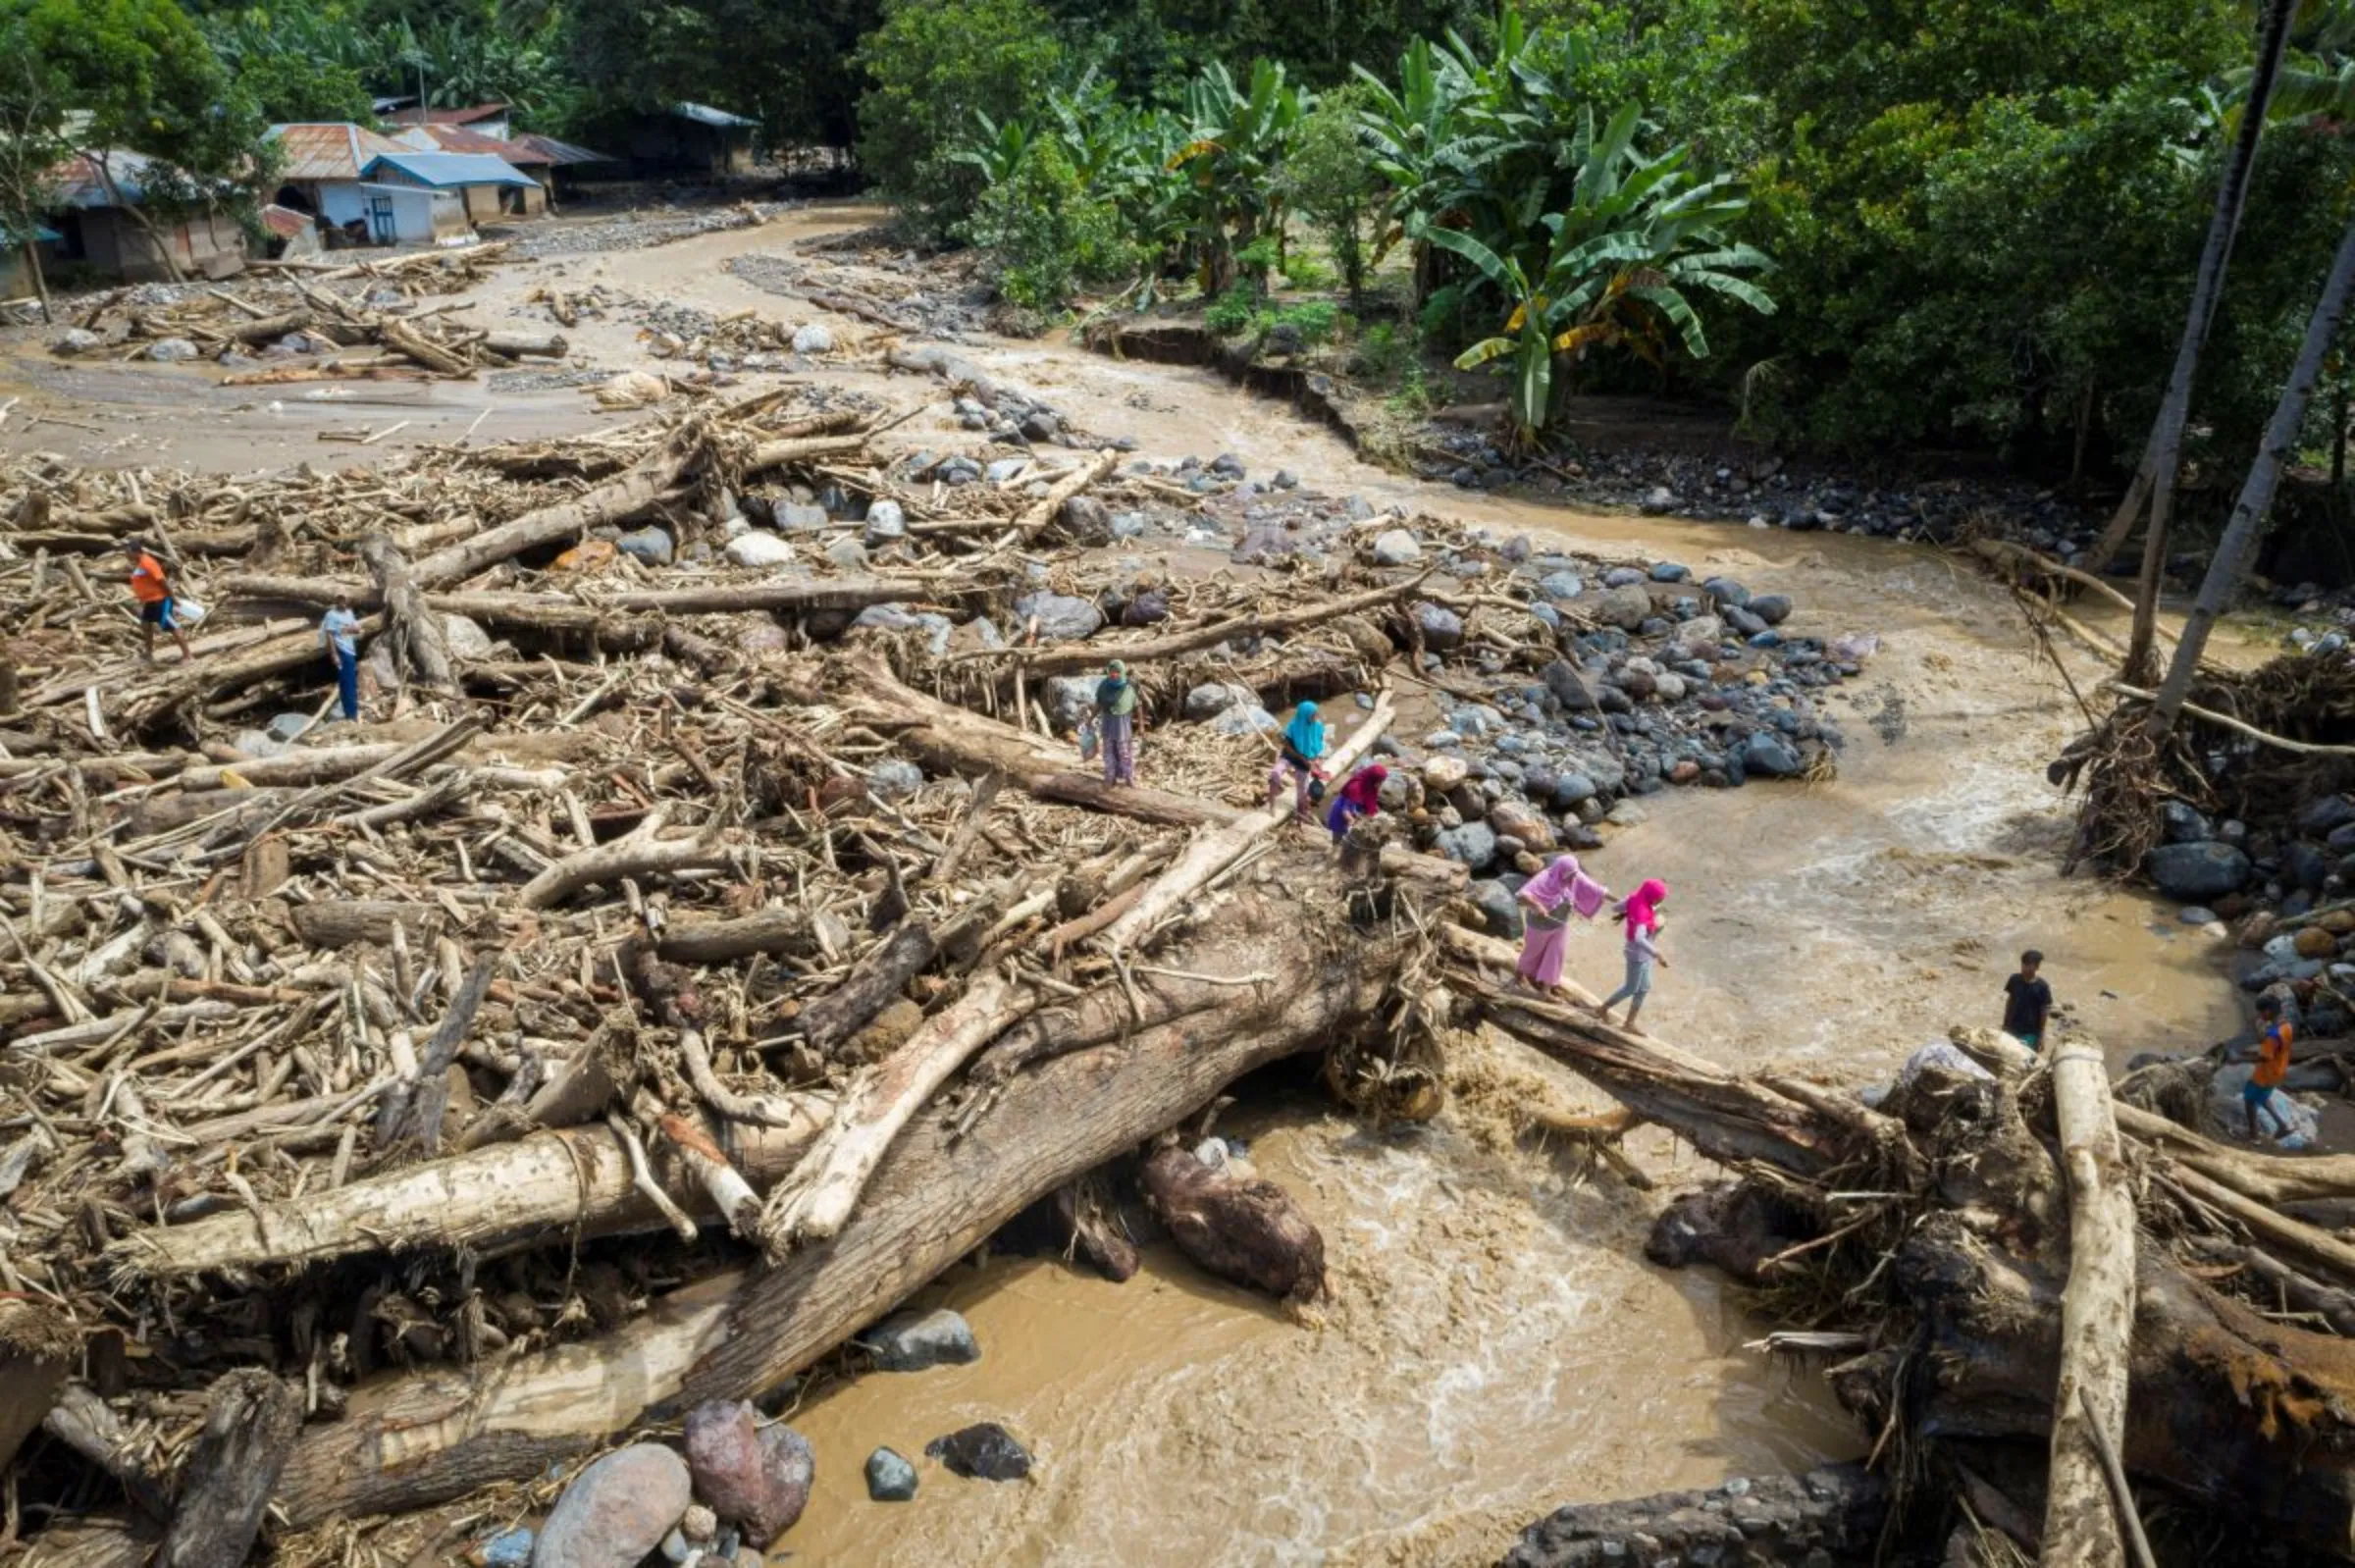 An aerial picture shows people walking through a pile of tree trunks after flash floods triggered by tropical cyclone Seroja in East Flores, East Nusa Tenggara province, Indonesia April 7, 2021